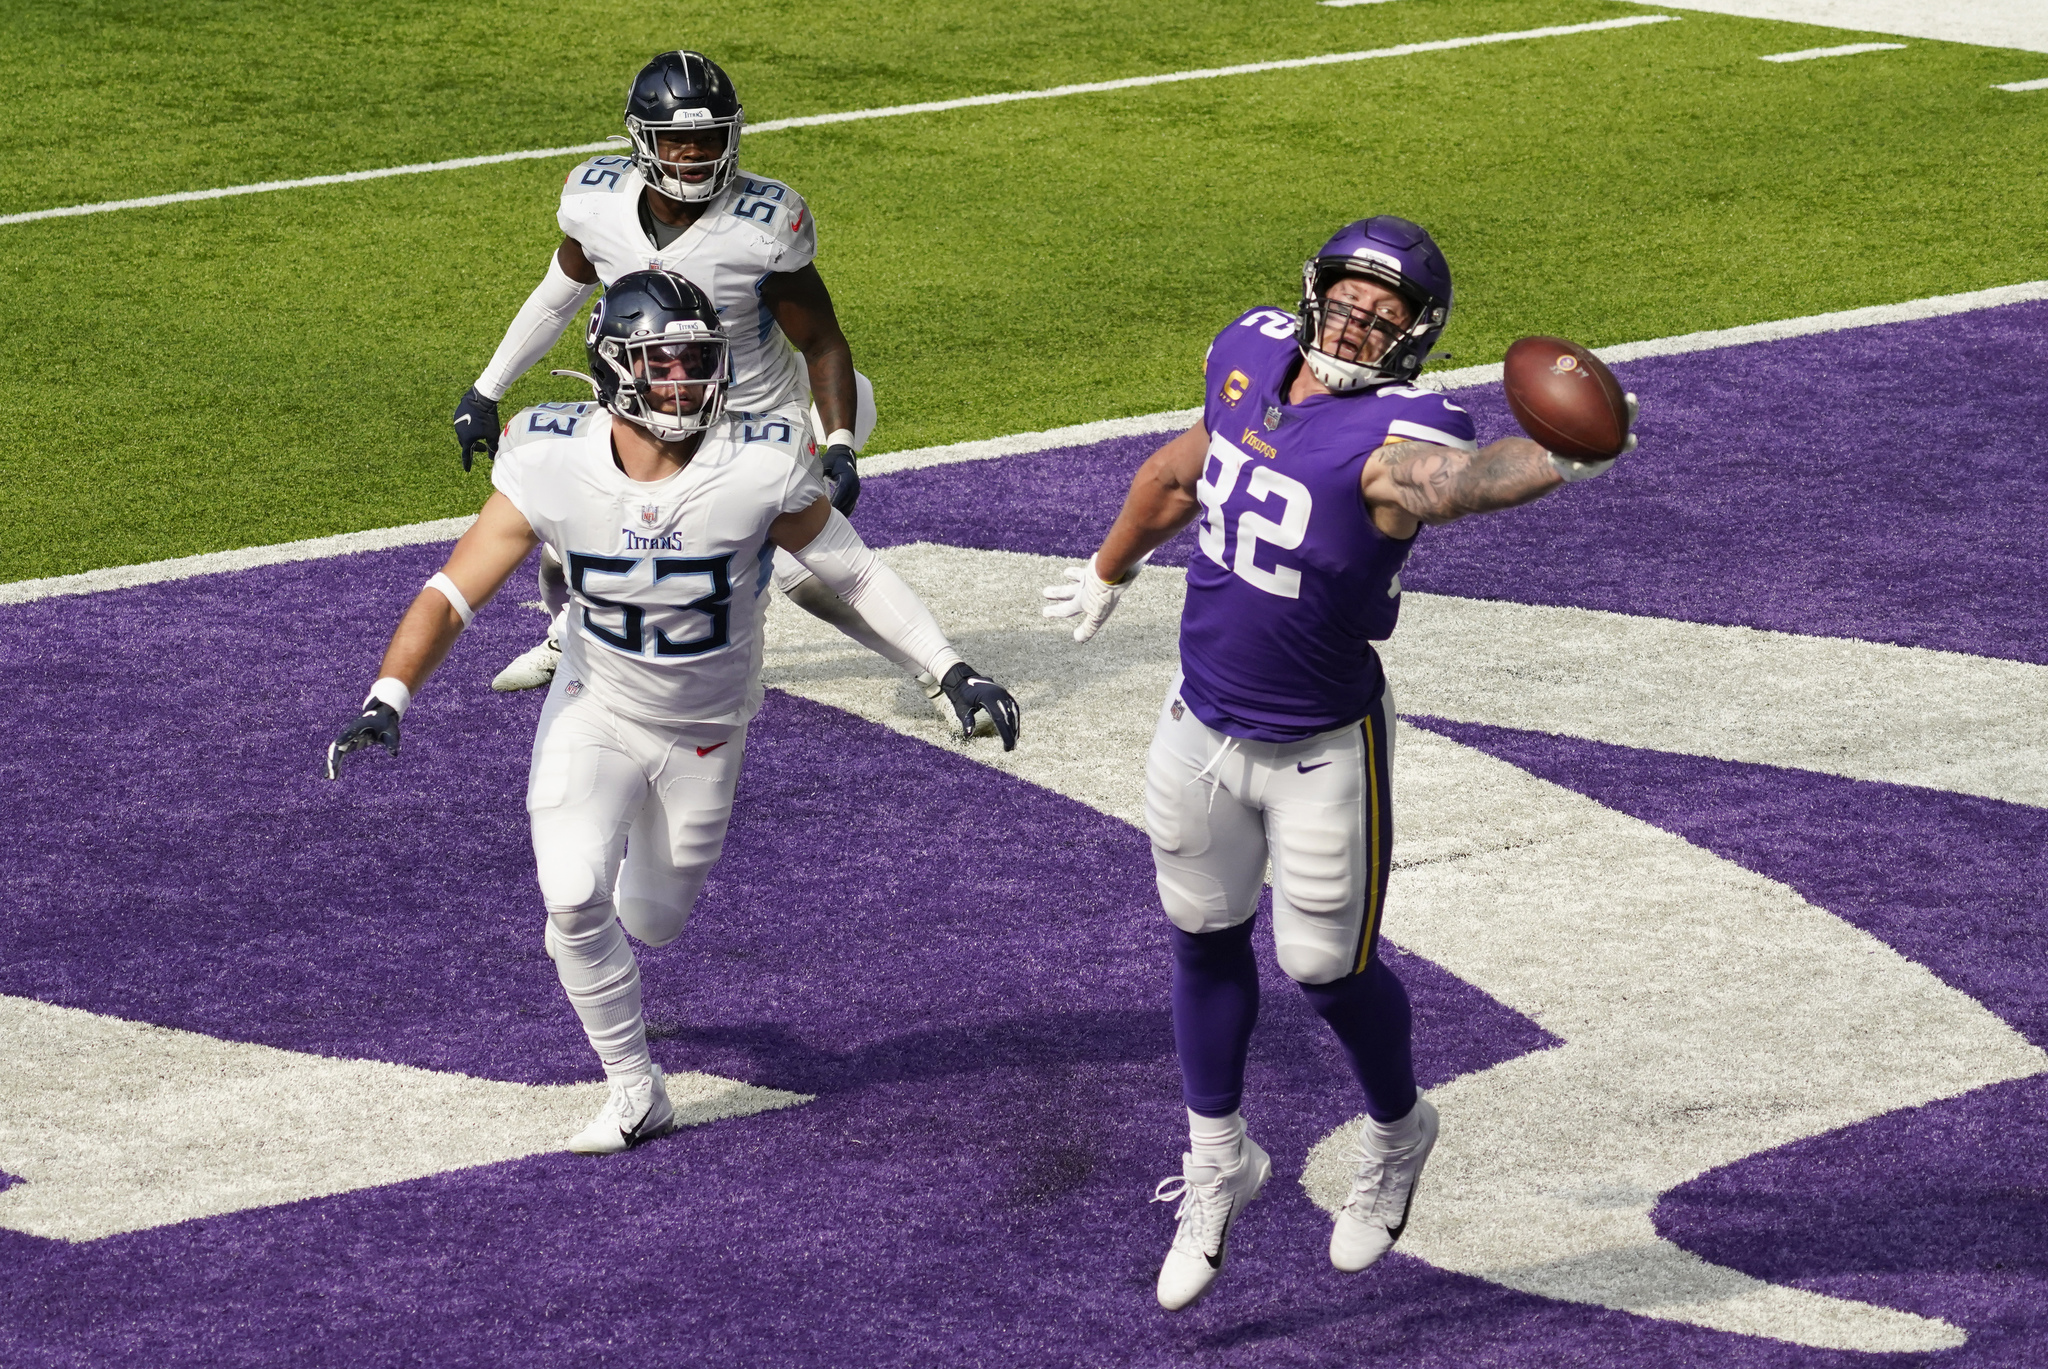 Minnesota Vikings tight end catches a 3-yard touchdown pass ahead of Tennessee Titans inside linebacker.